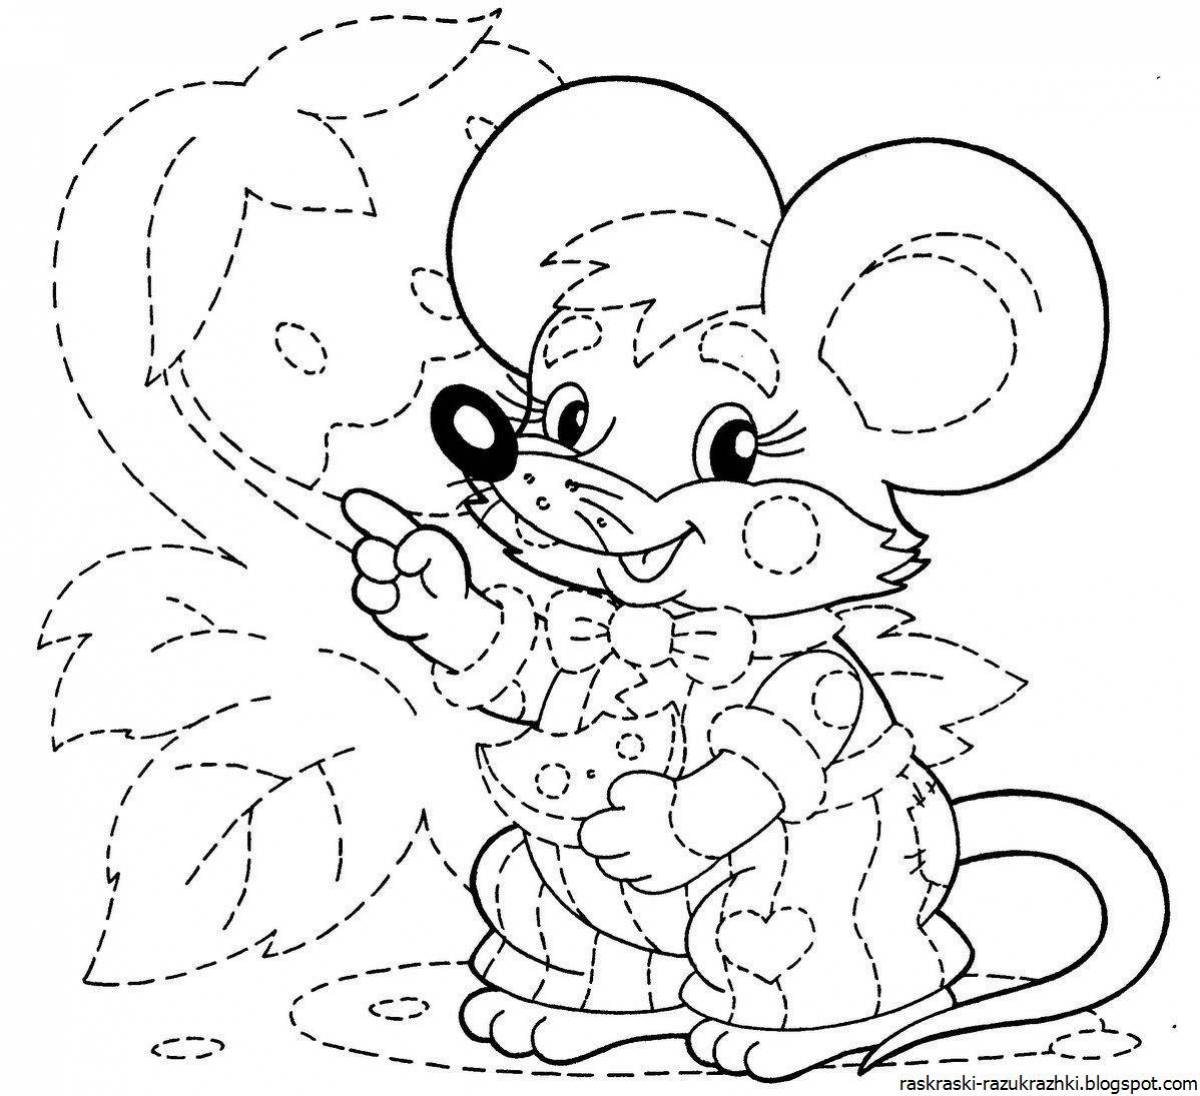 Colorful mouse coloring page